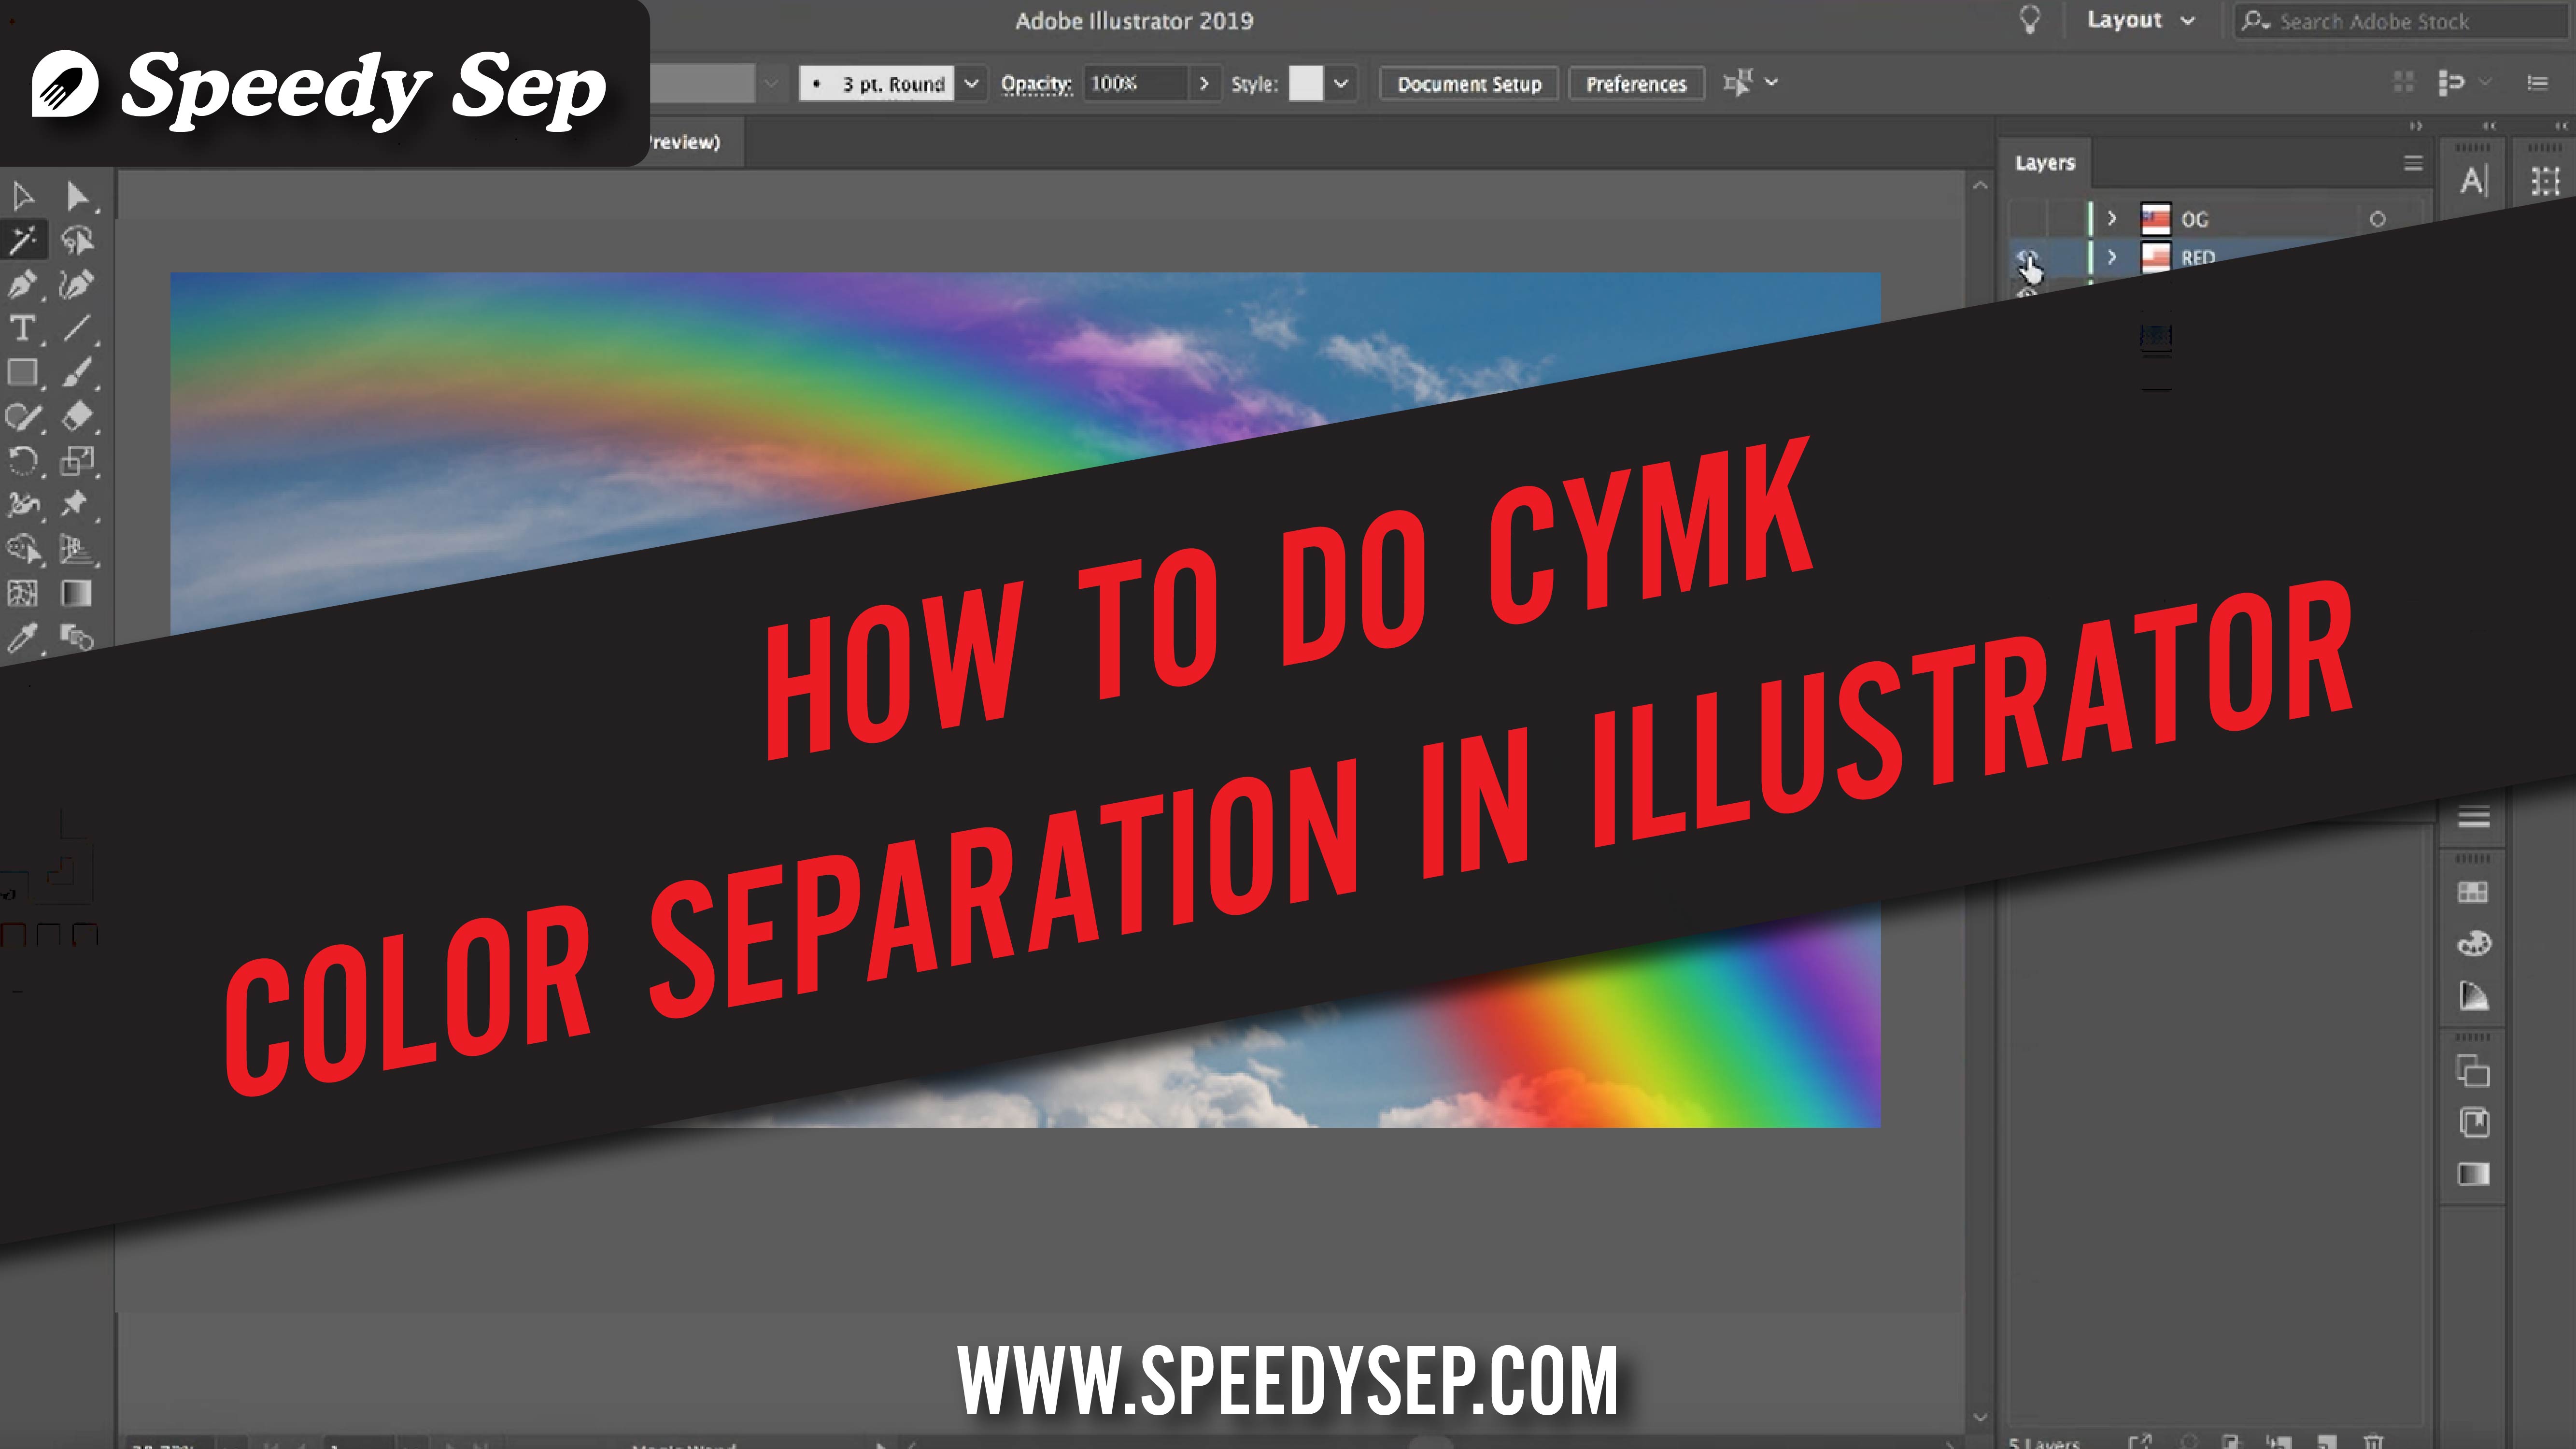 How to Split an Image in Adobe Photoshop